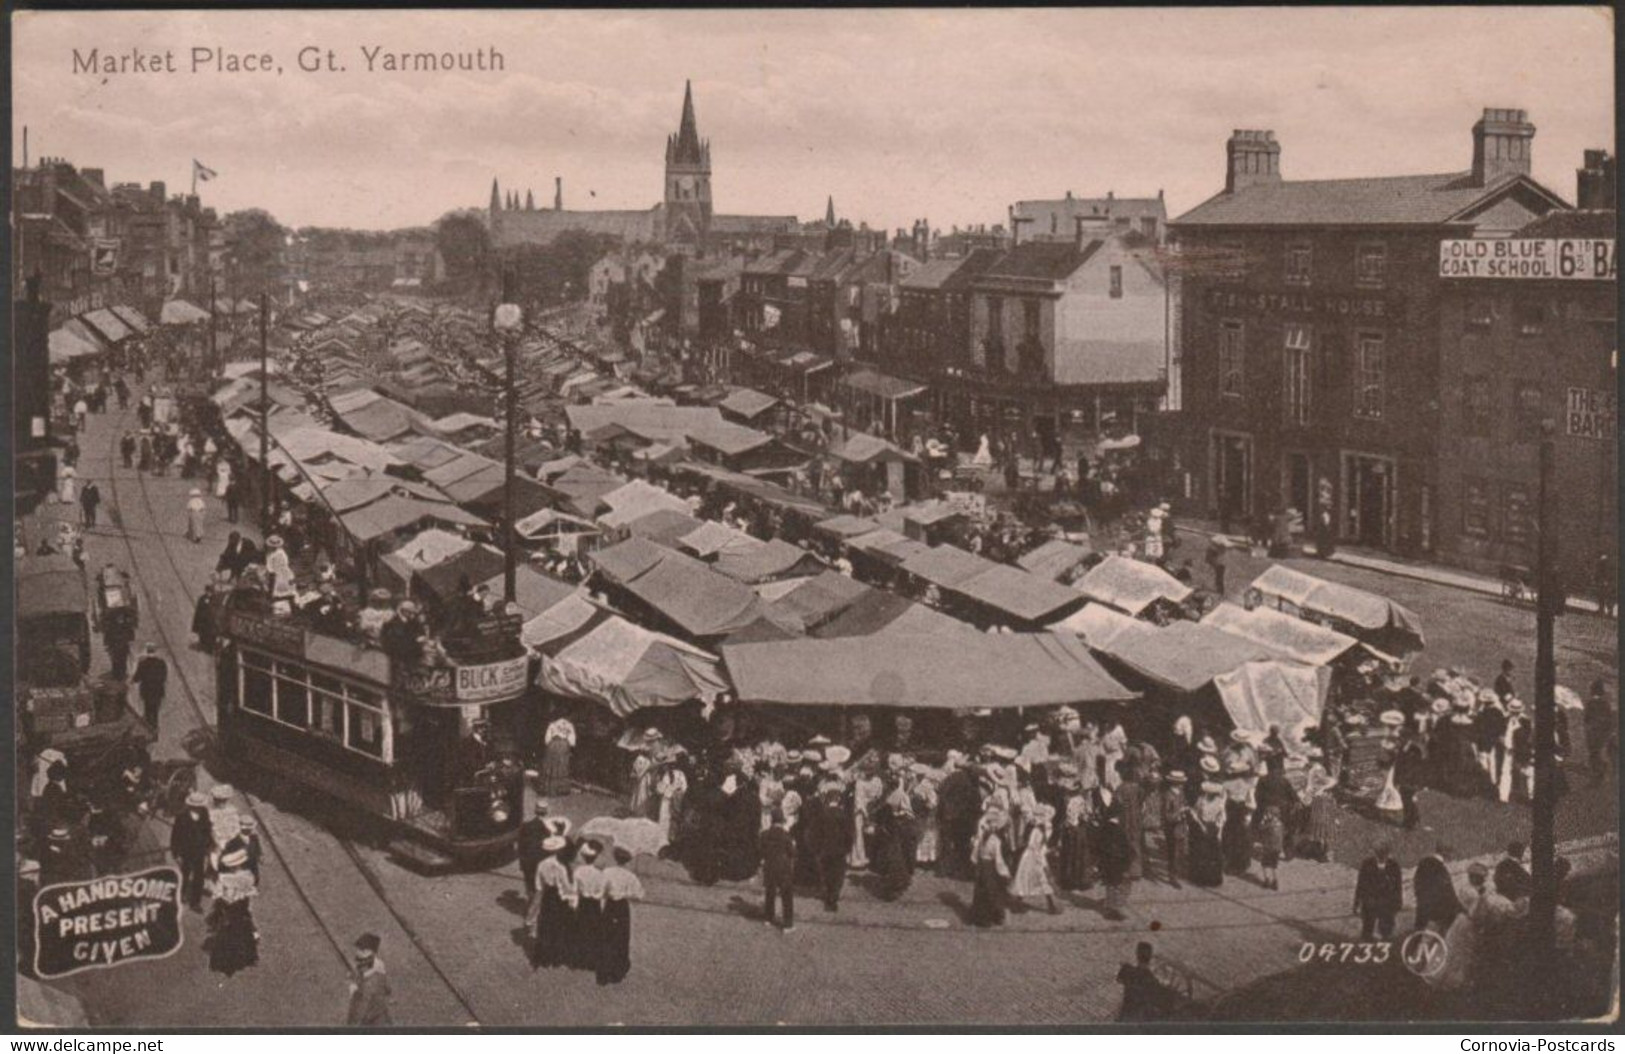 Market Place, Great Yarmouth, Norfolk, 1913 - Valentine's Postcard - Great Yarmouth